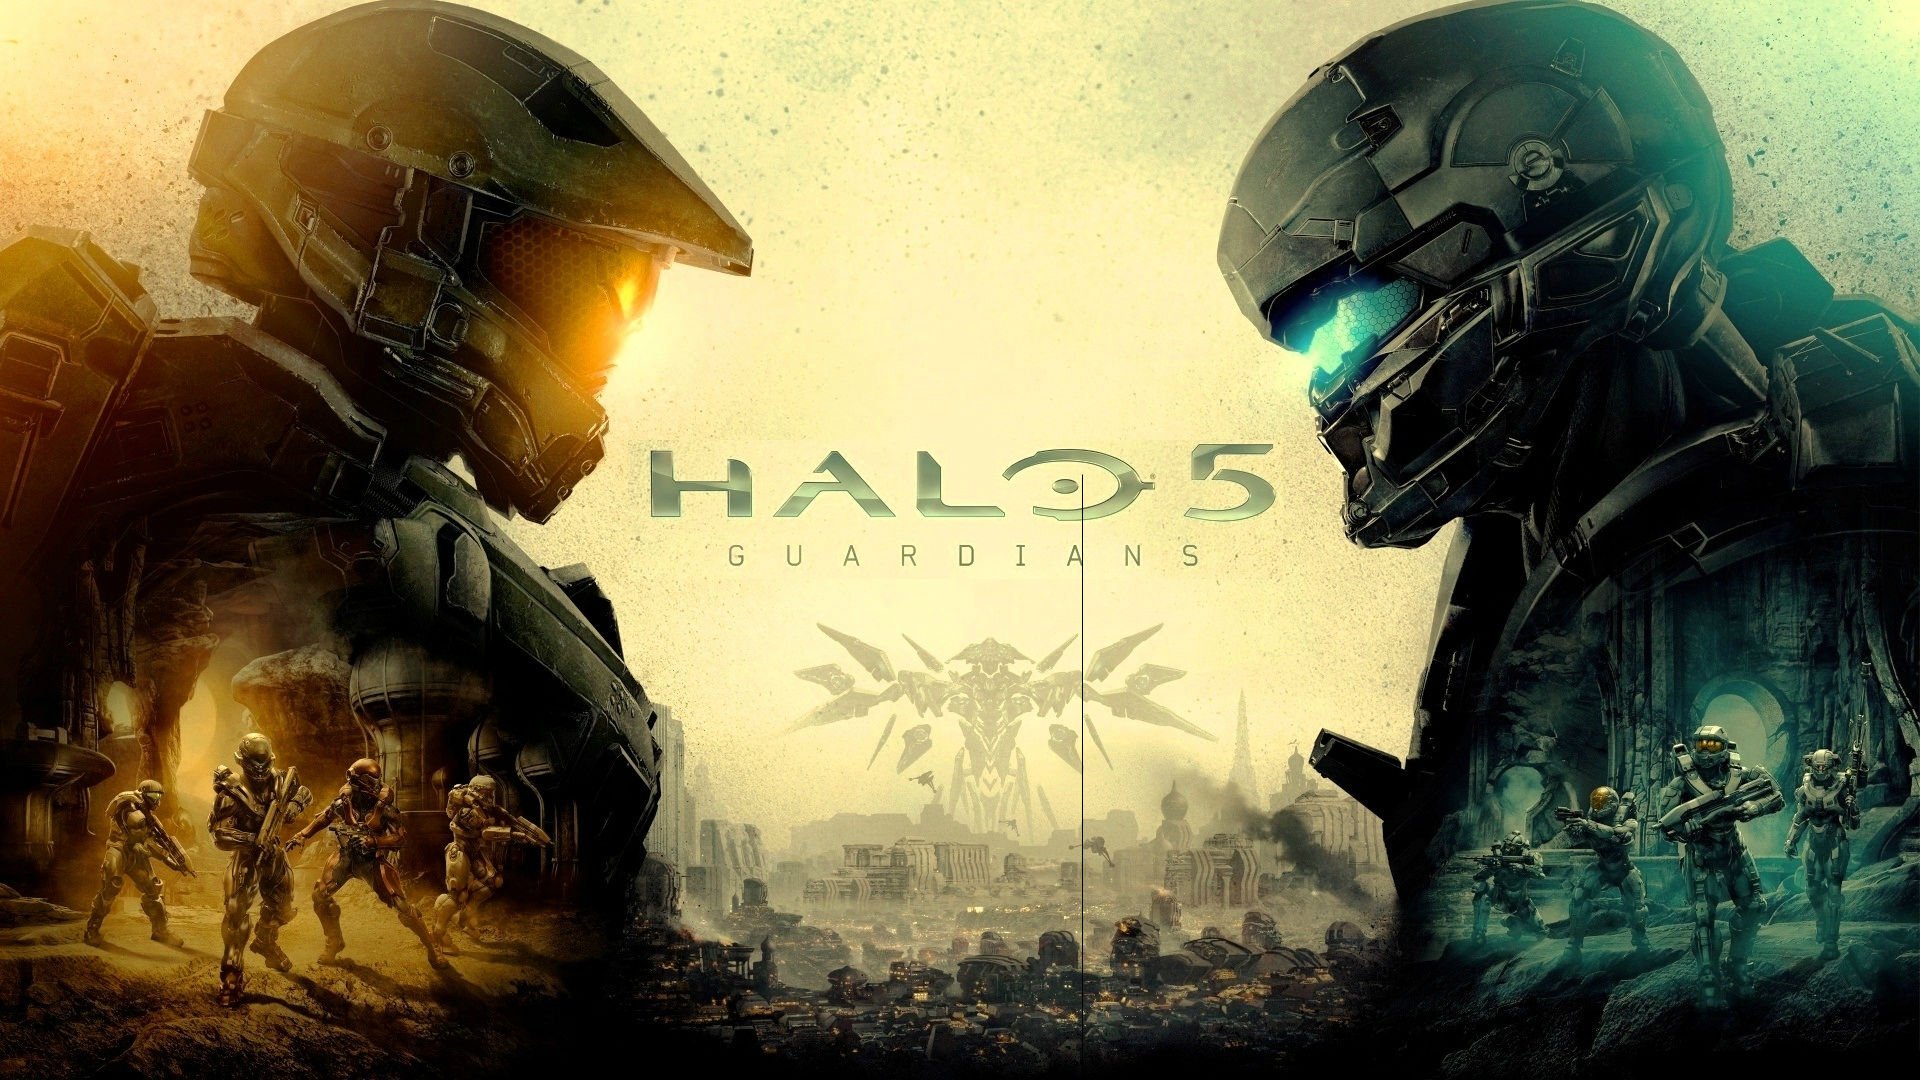 halo, 5, Guardians, Shooter, Fps, Action, Fighting, Warrior, Sci fi, Futuristic, 1haloguardians, Poster Wallpaper